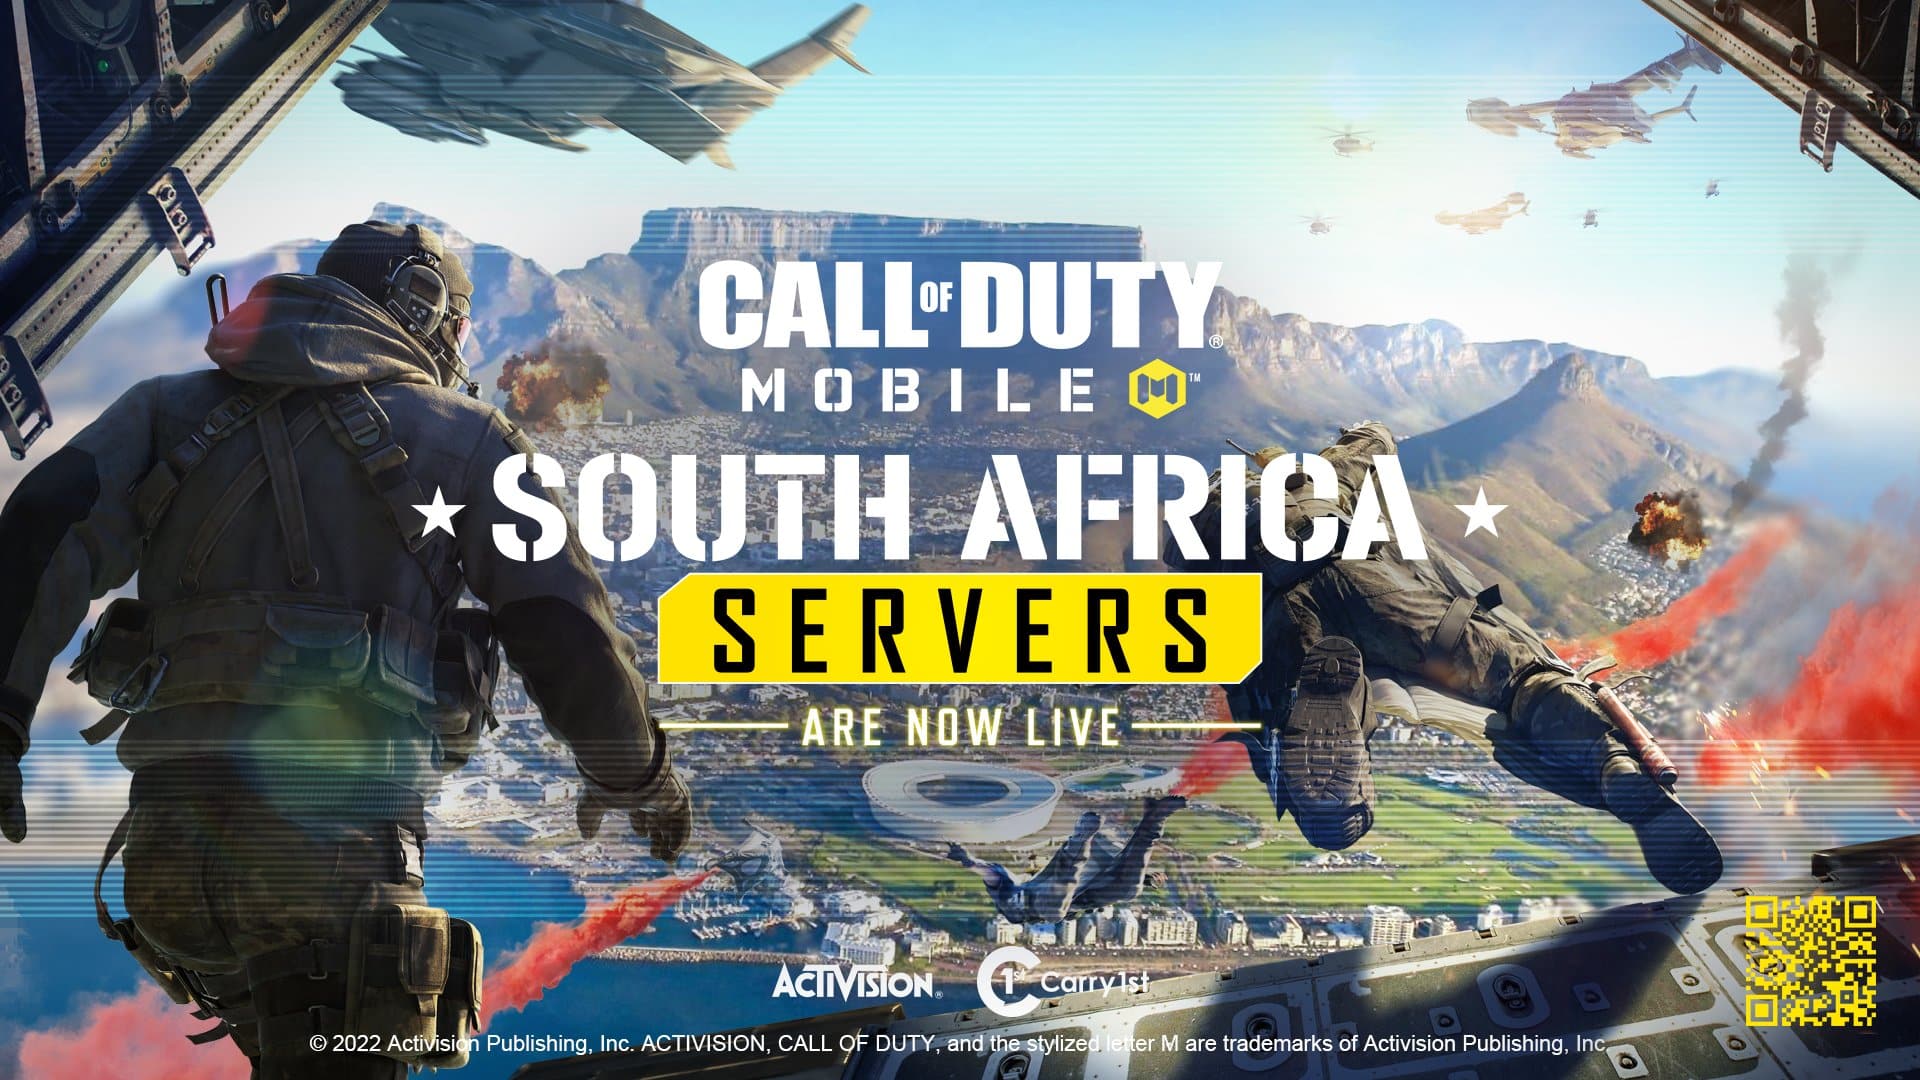 Call of Duty Mobile South African Servers